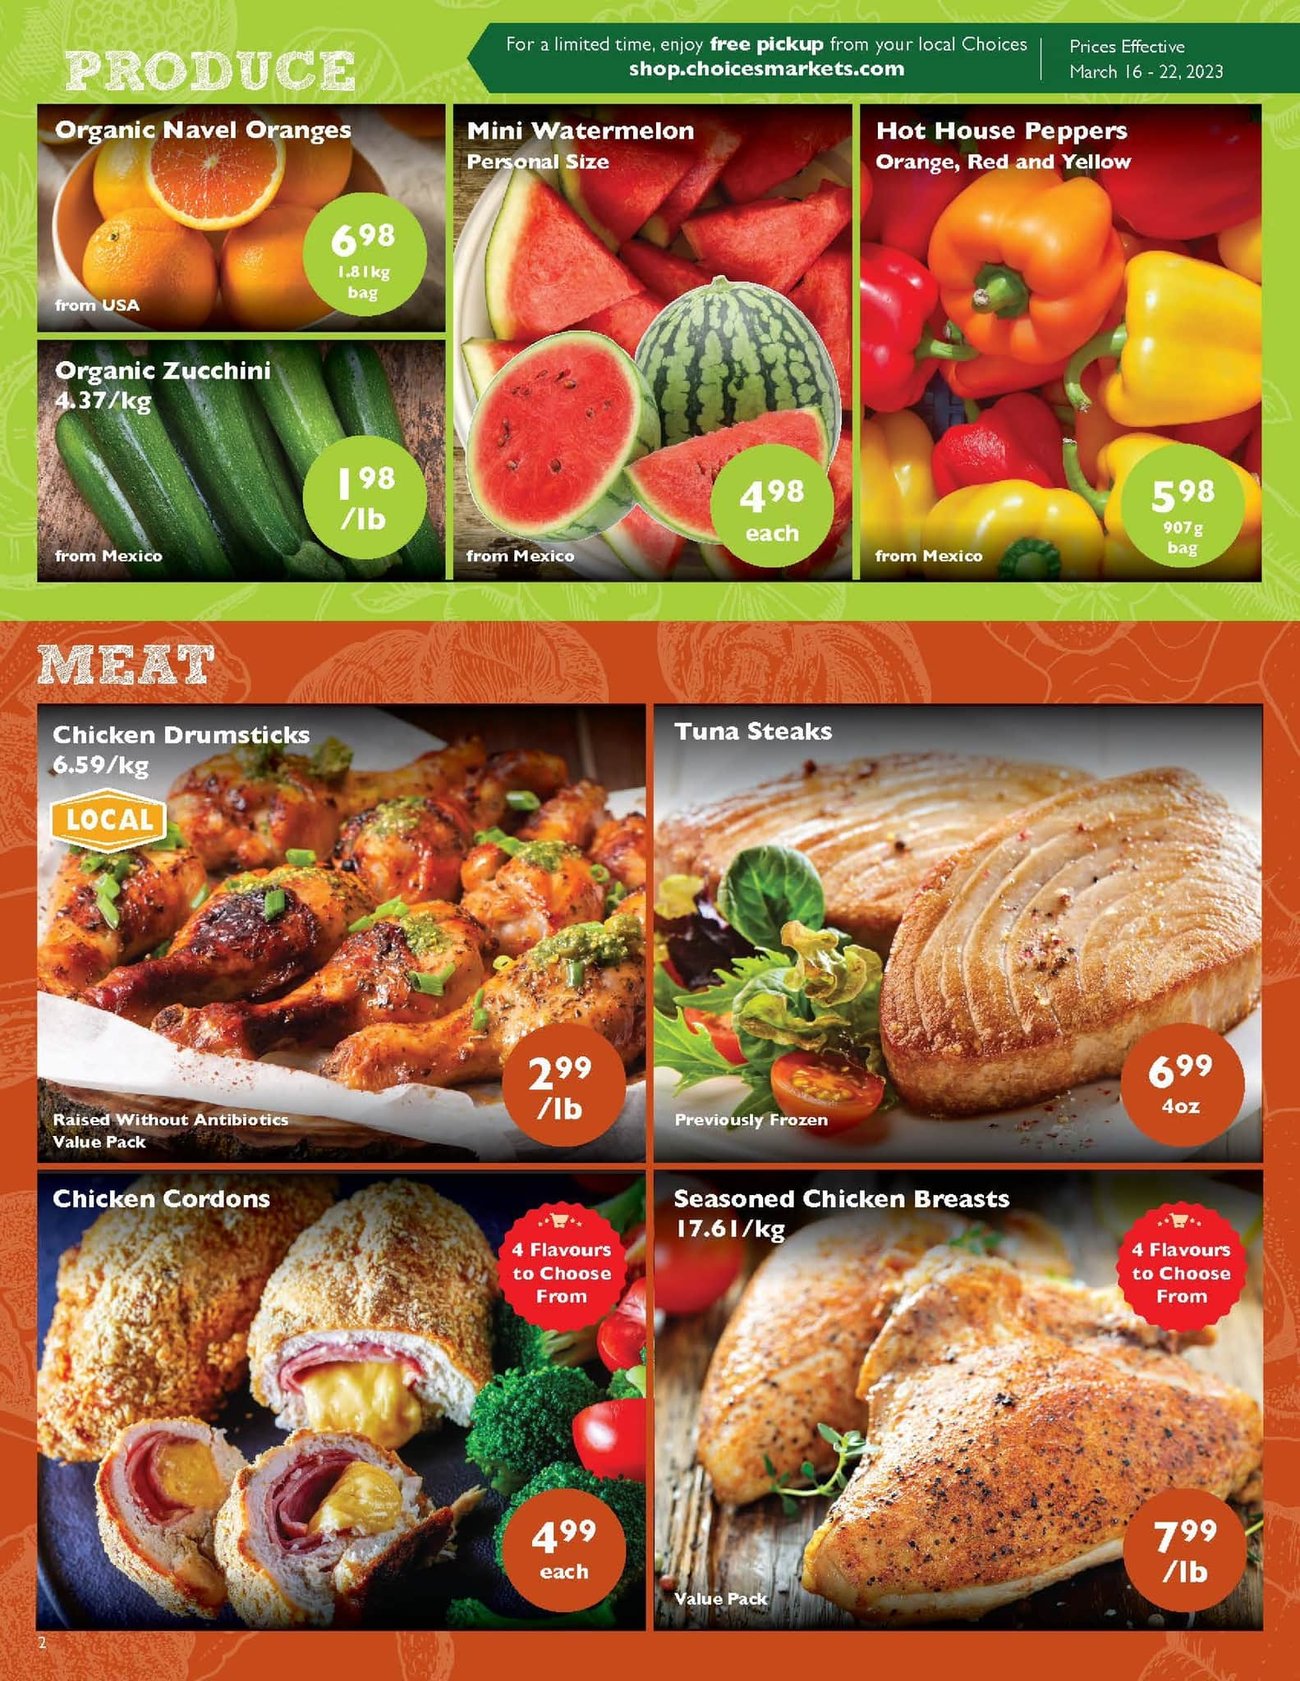 Choices Markets - Weekly Flyer Specials - Page 2